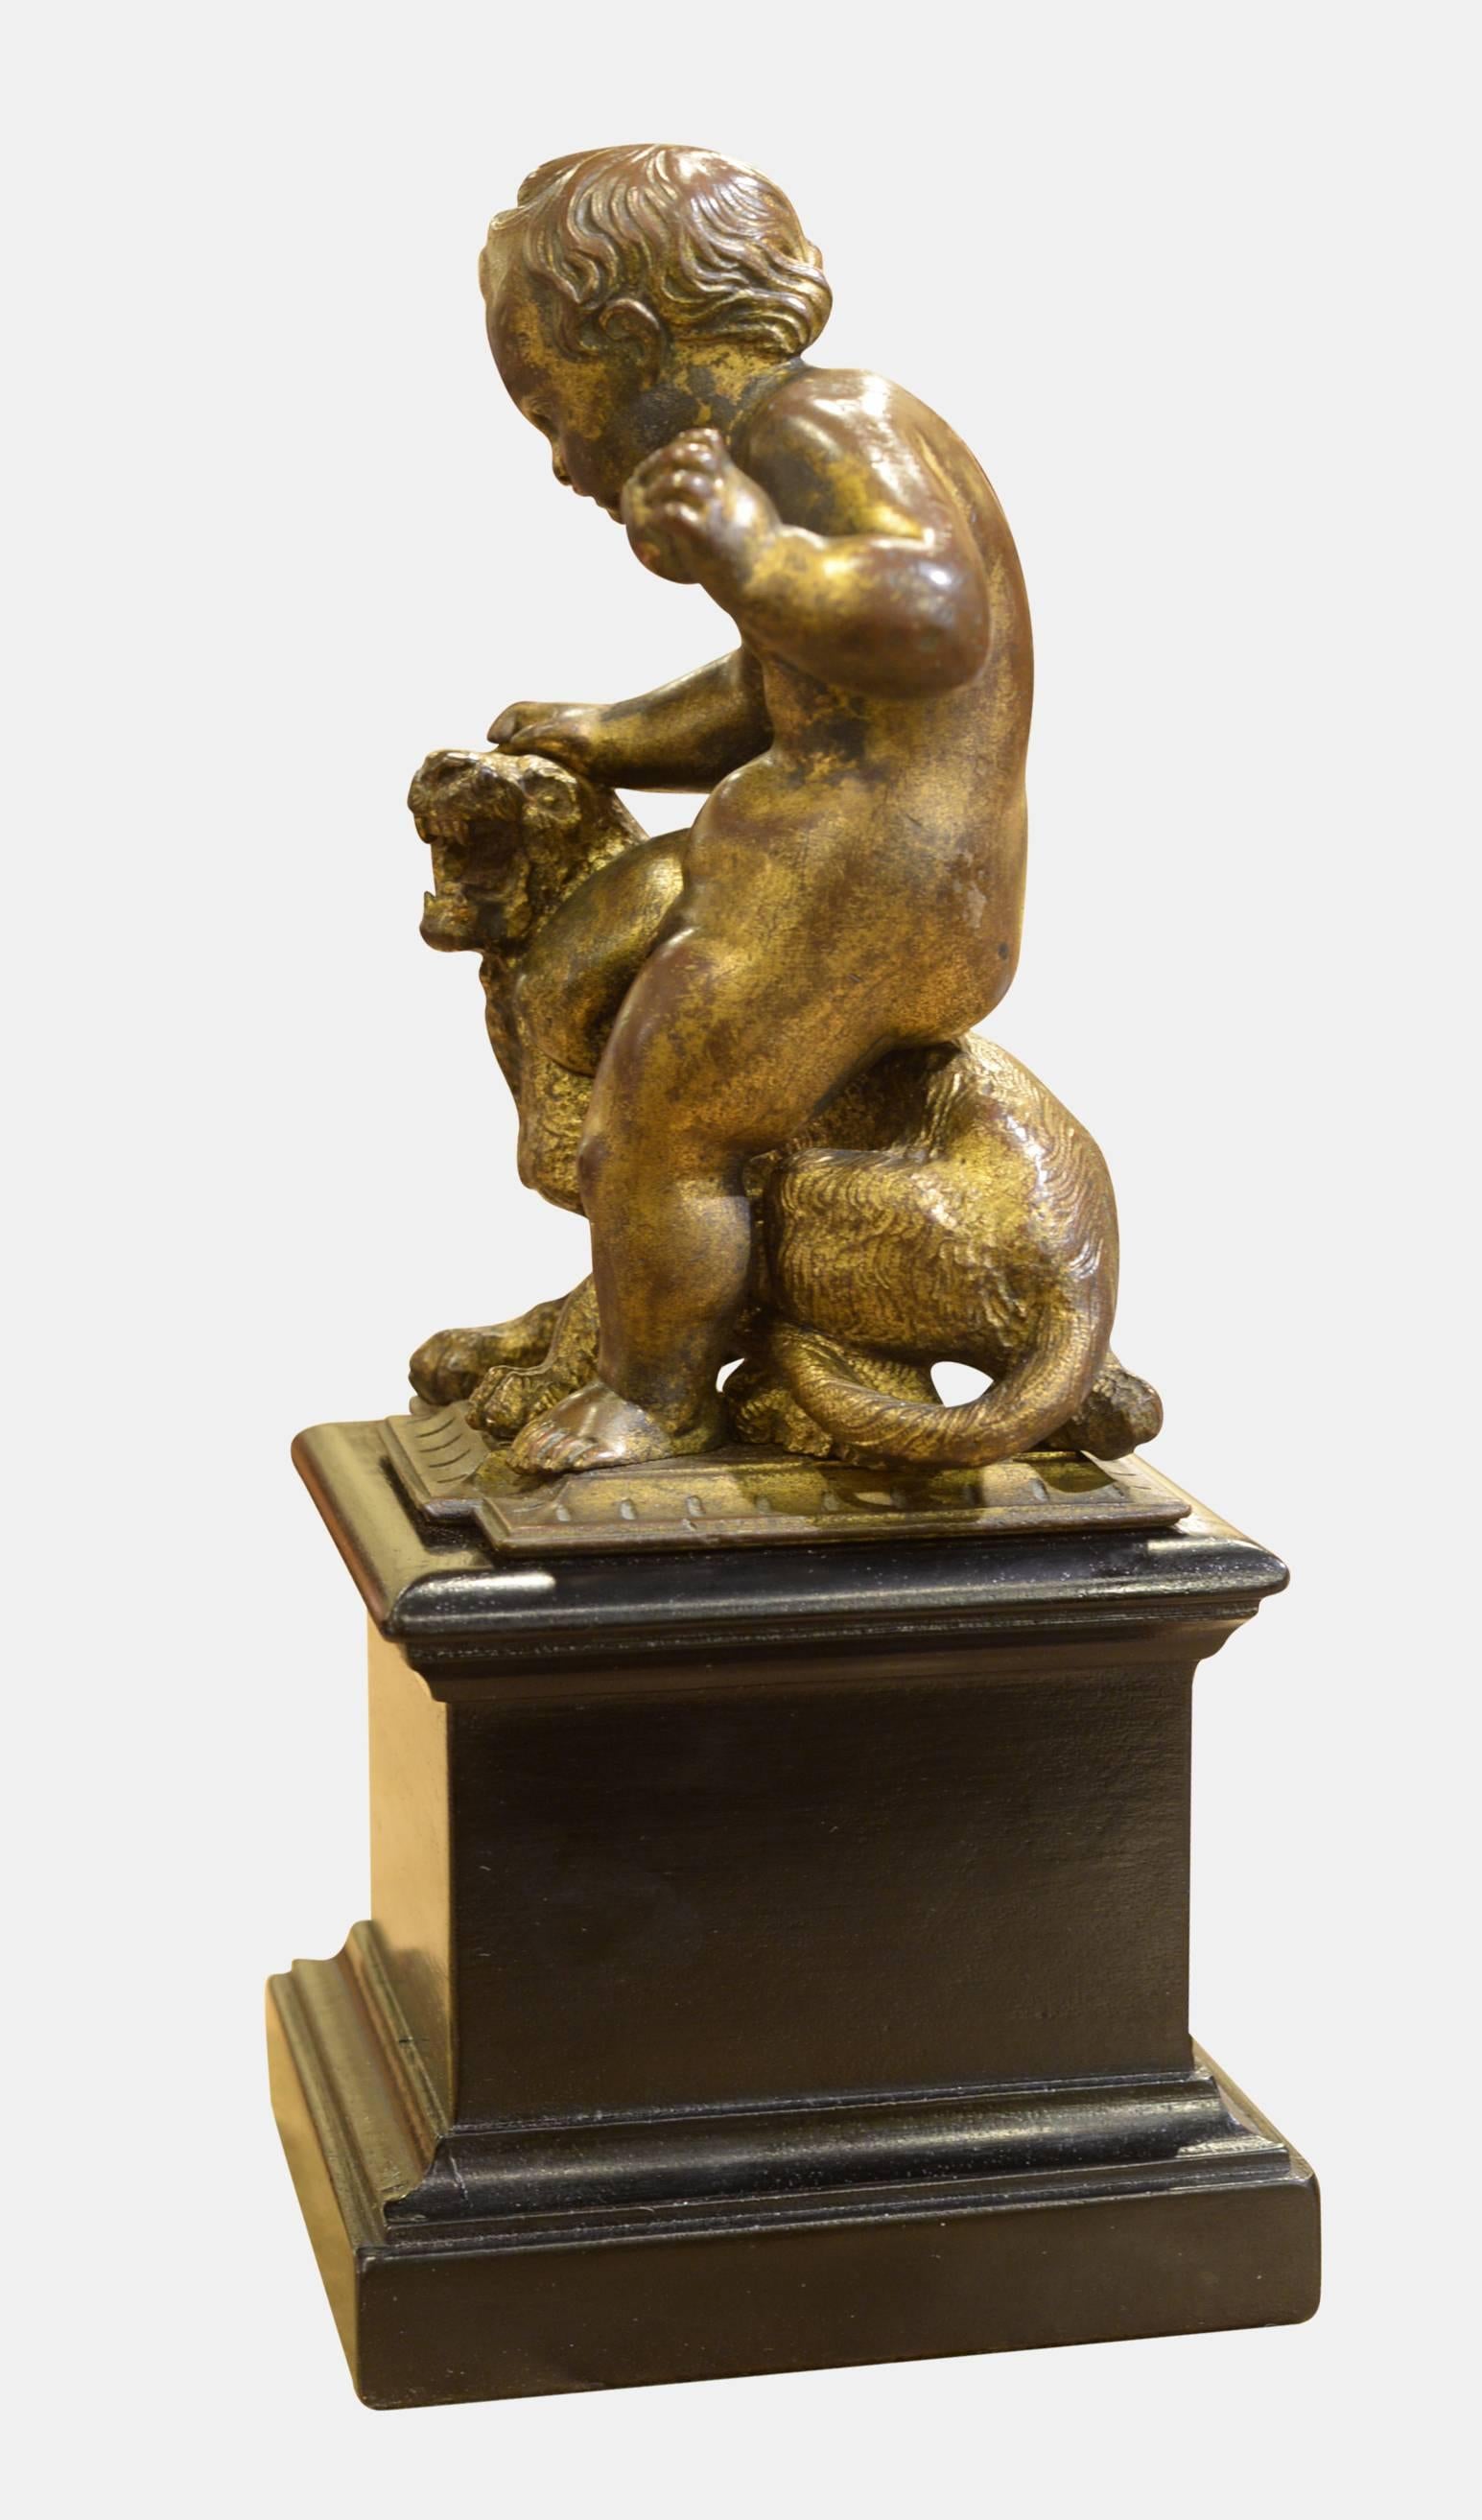 Early 19th century French gilt bronze of the infant Bacchus with his attendant panther. Lovely rubbed gilt patination, raised on an ebonised plinth,

circa 1820.